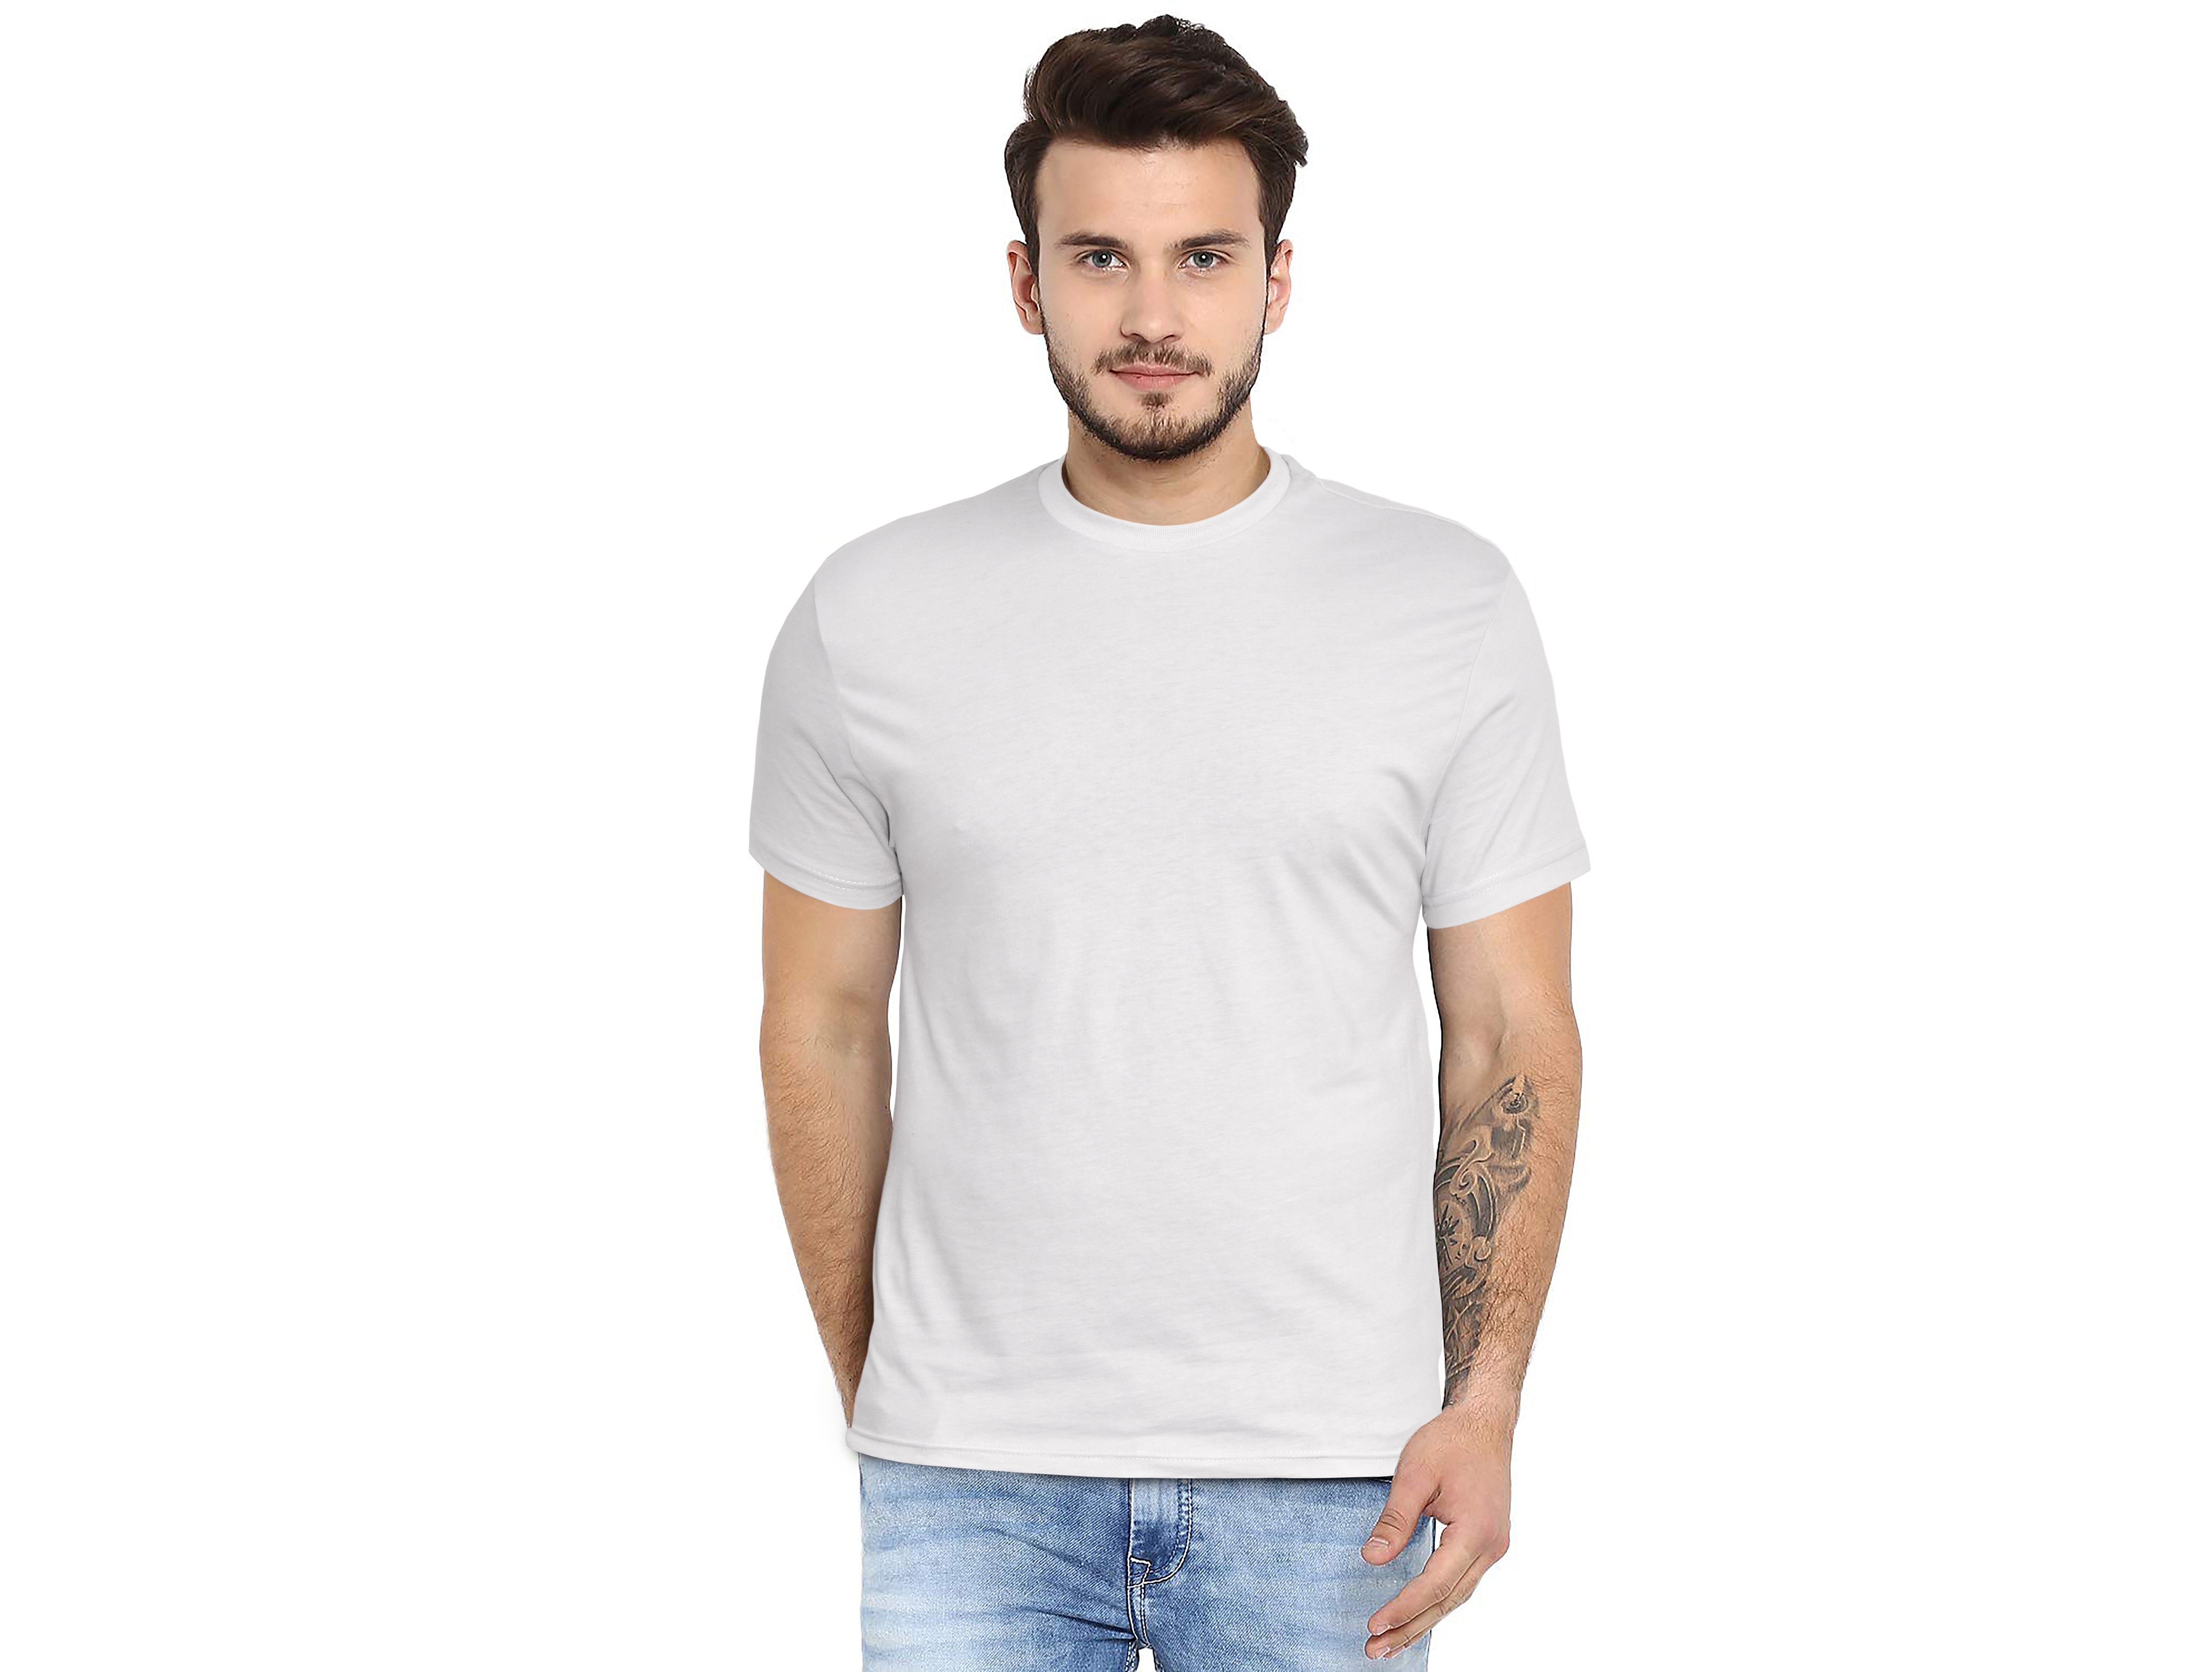 Cotton Blend Crew Neck Tees, Pack of 4